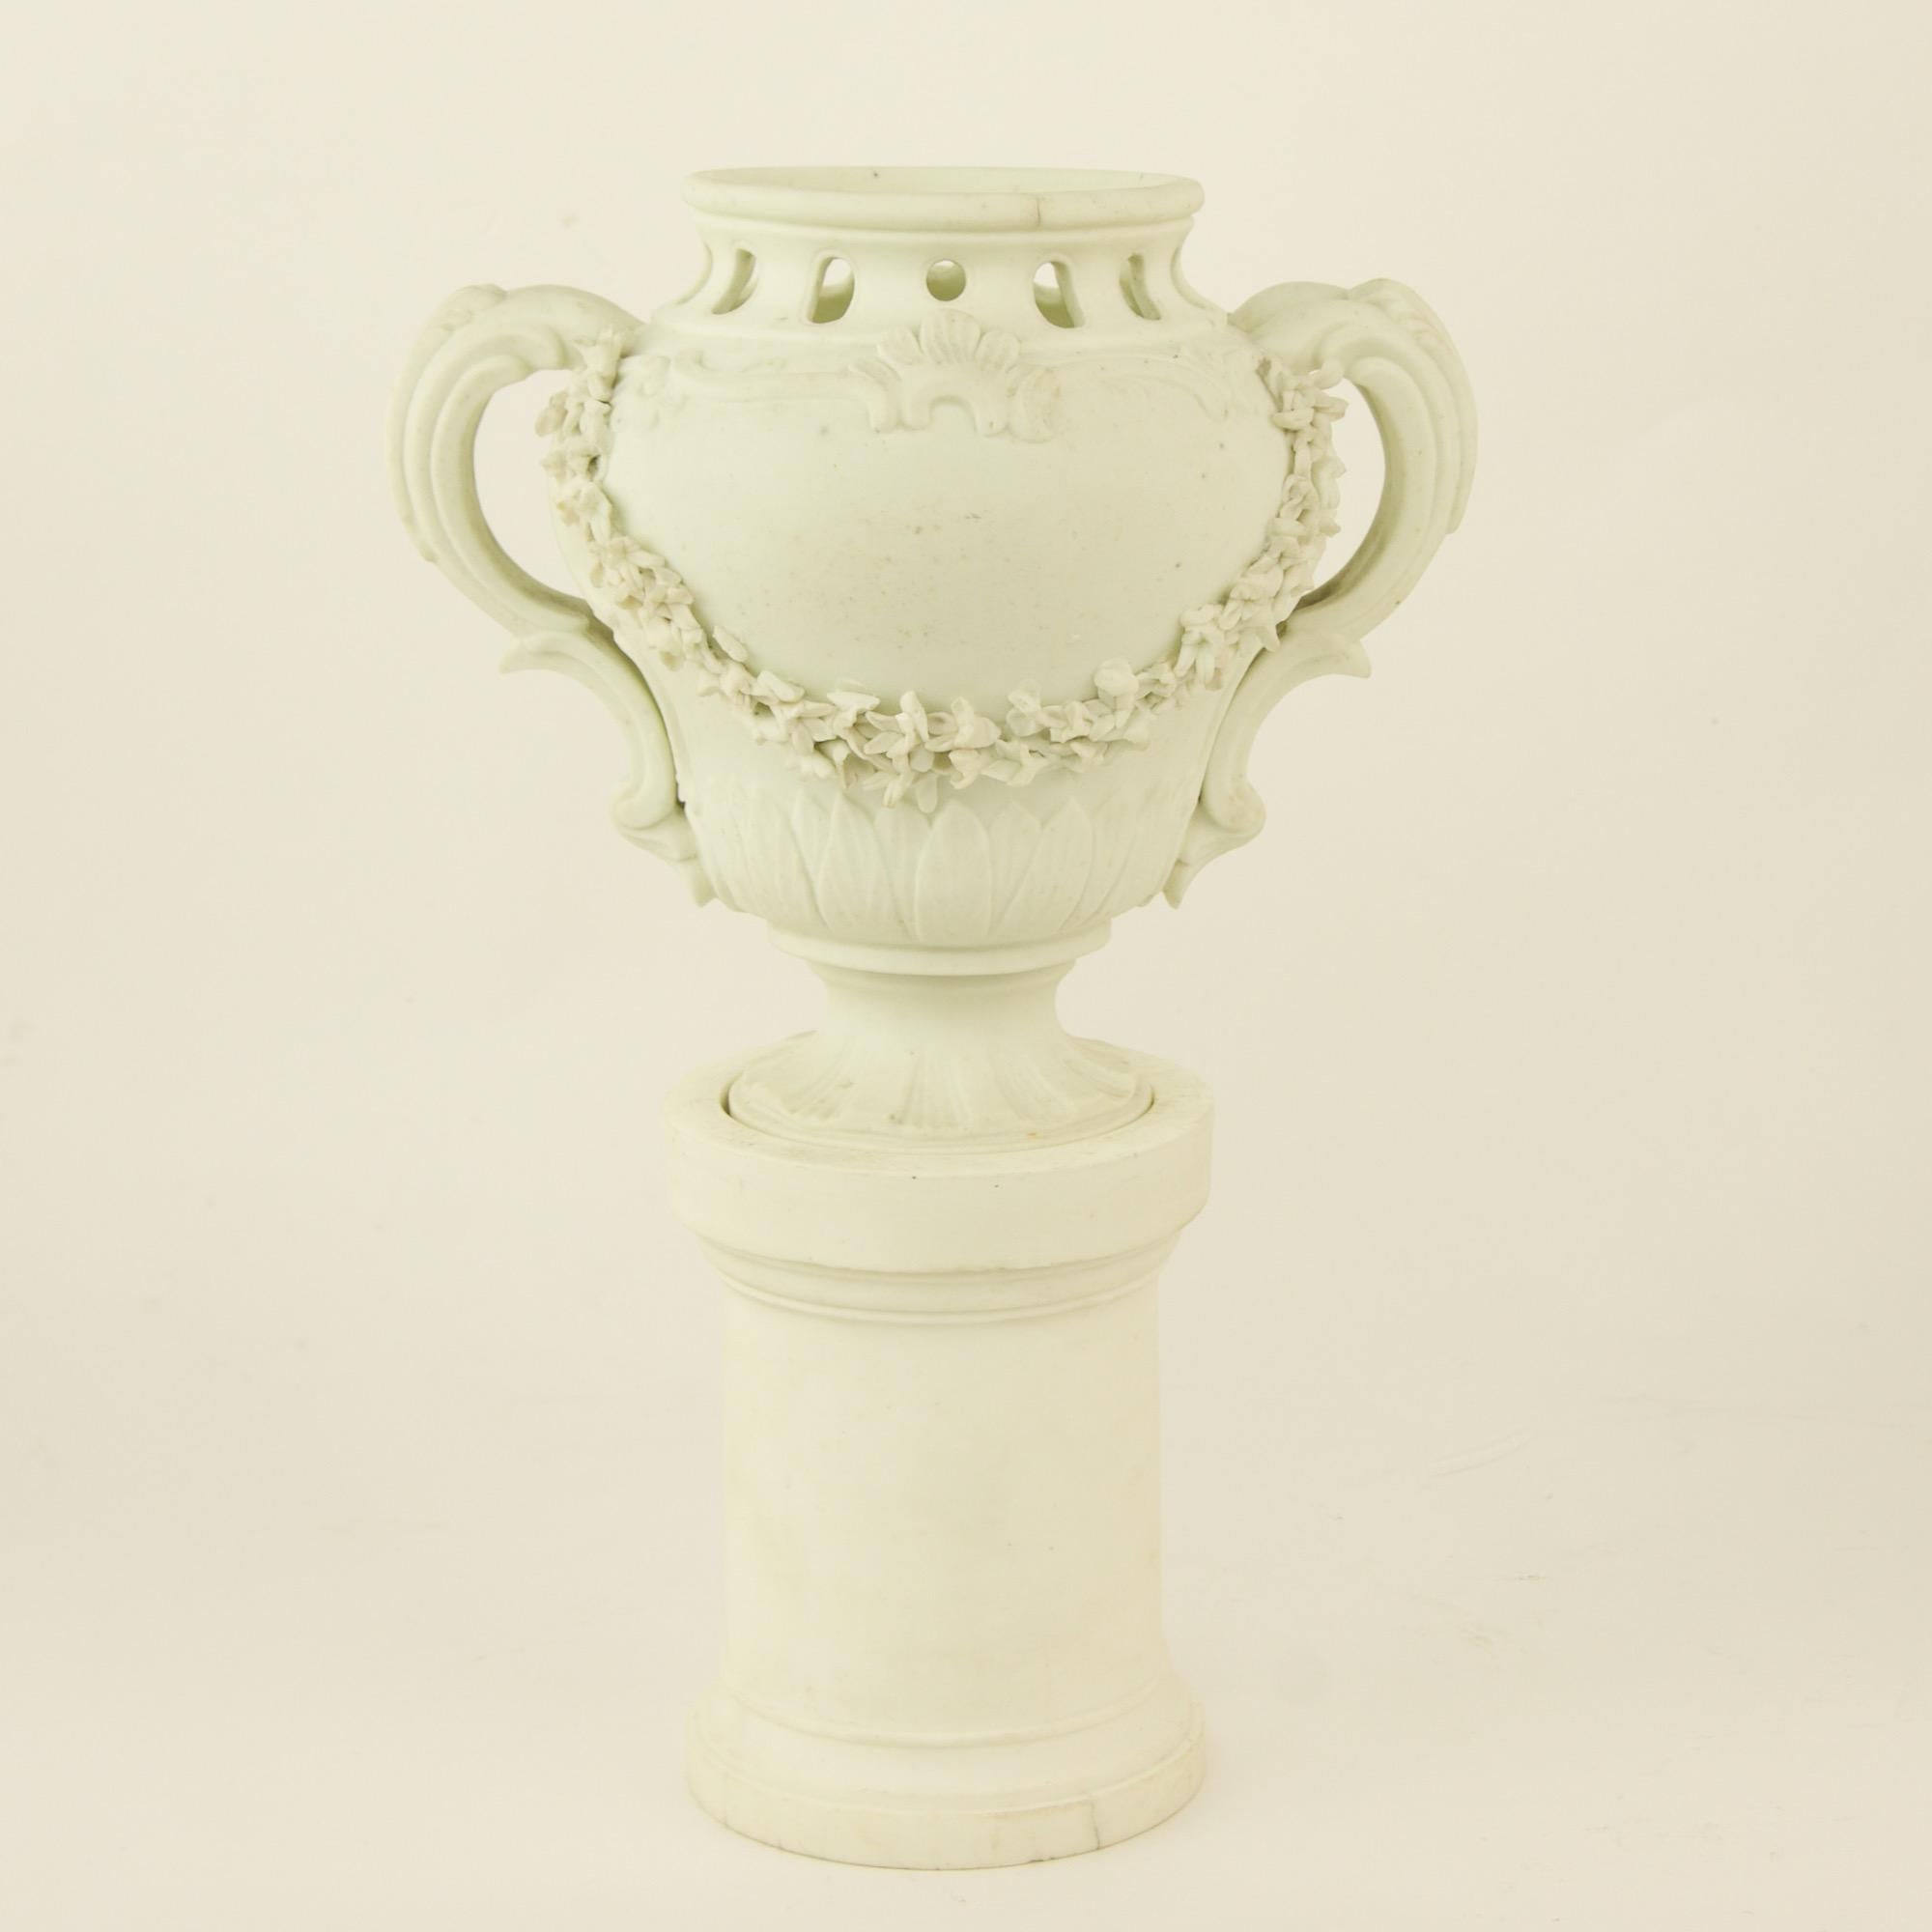 Pair of French Mid-18th Century Biscuit Porcelain Louis XV Vases and Pedestals For Sale 8